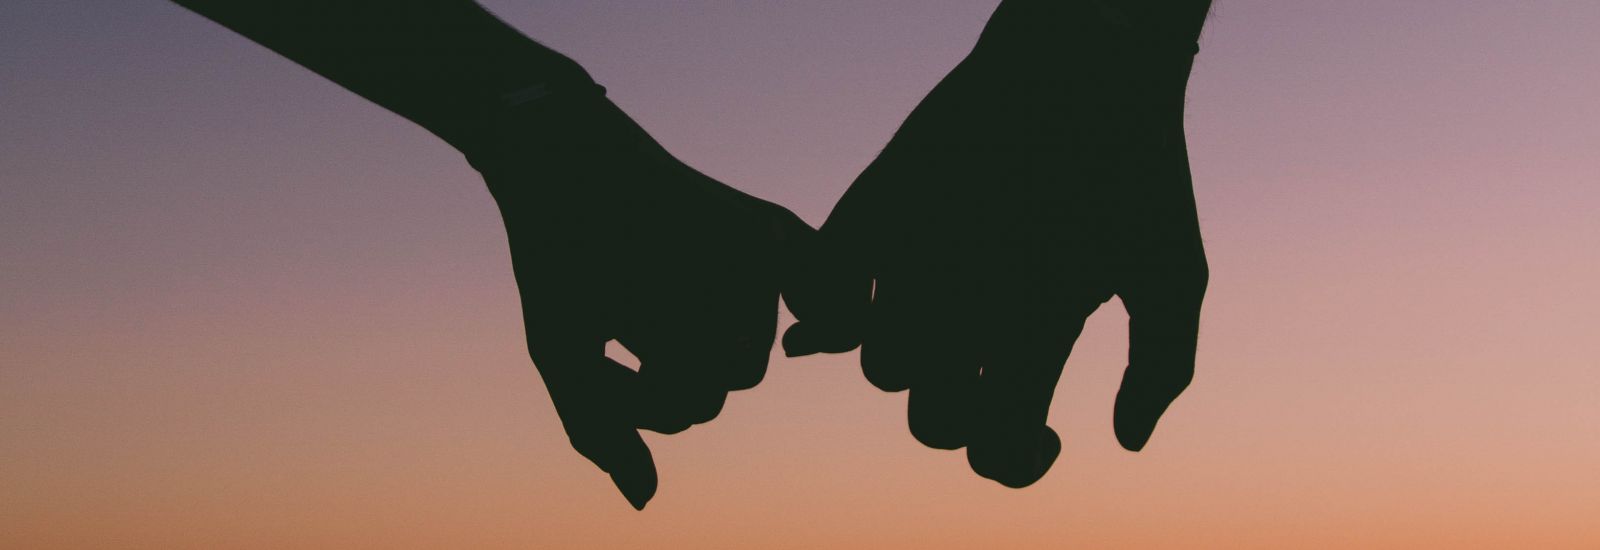 Silhouette holding hands in front of ocean and sunset